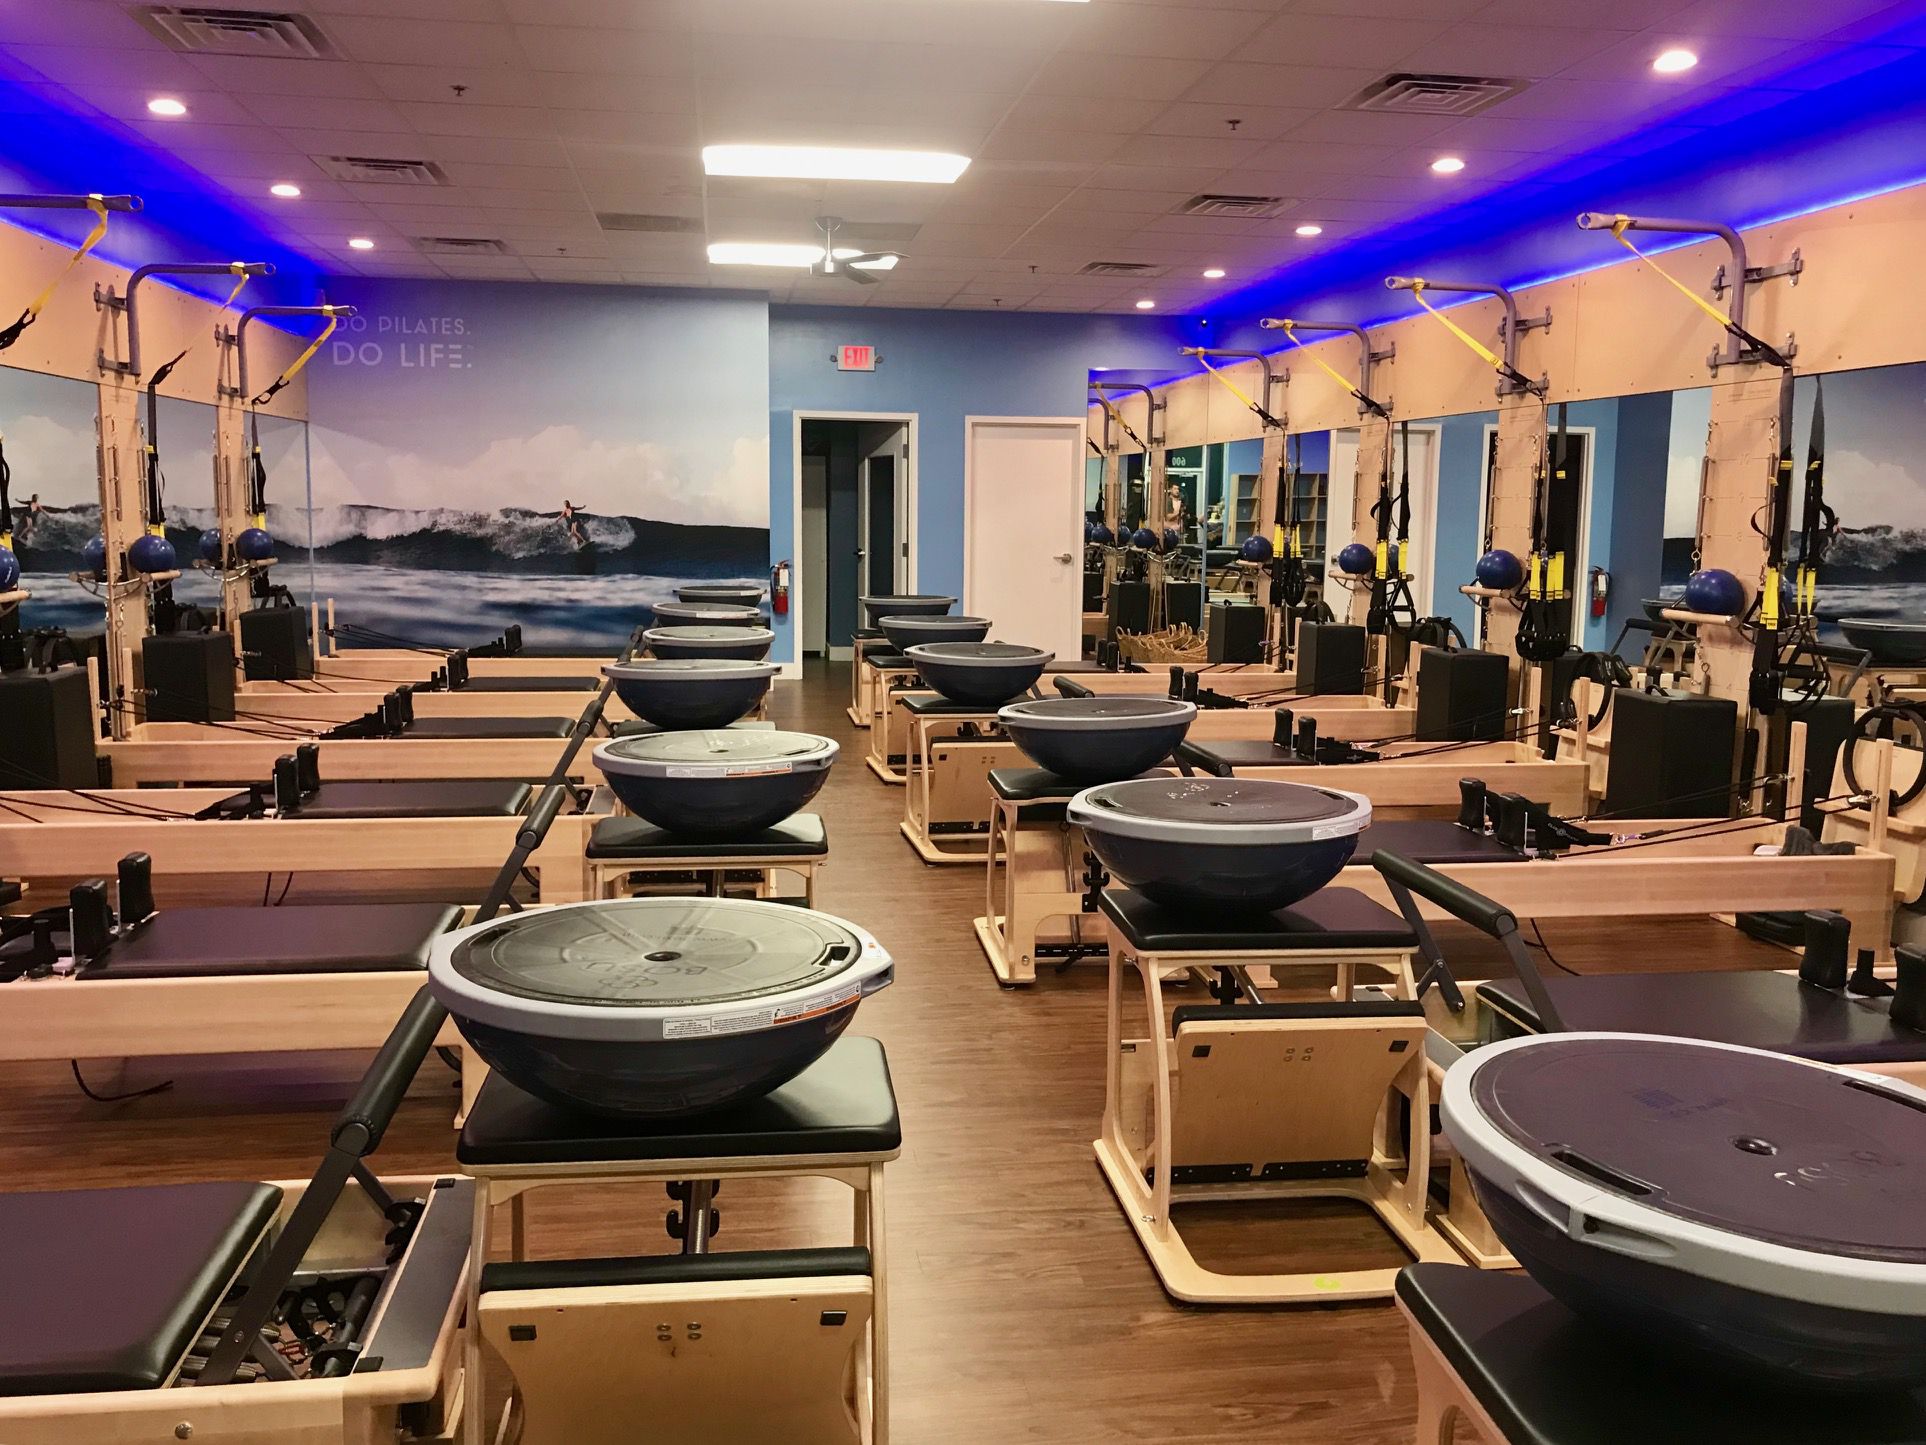 Club Pilates to open north St. Pete fitness studio on 4th Street